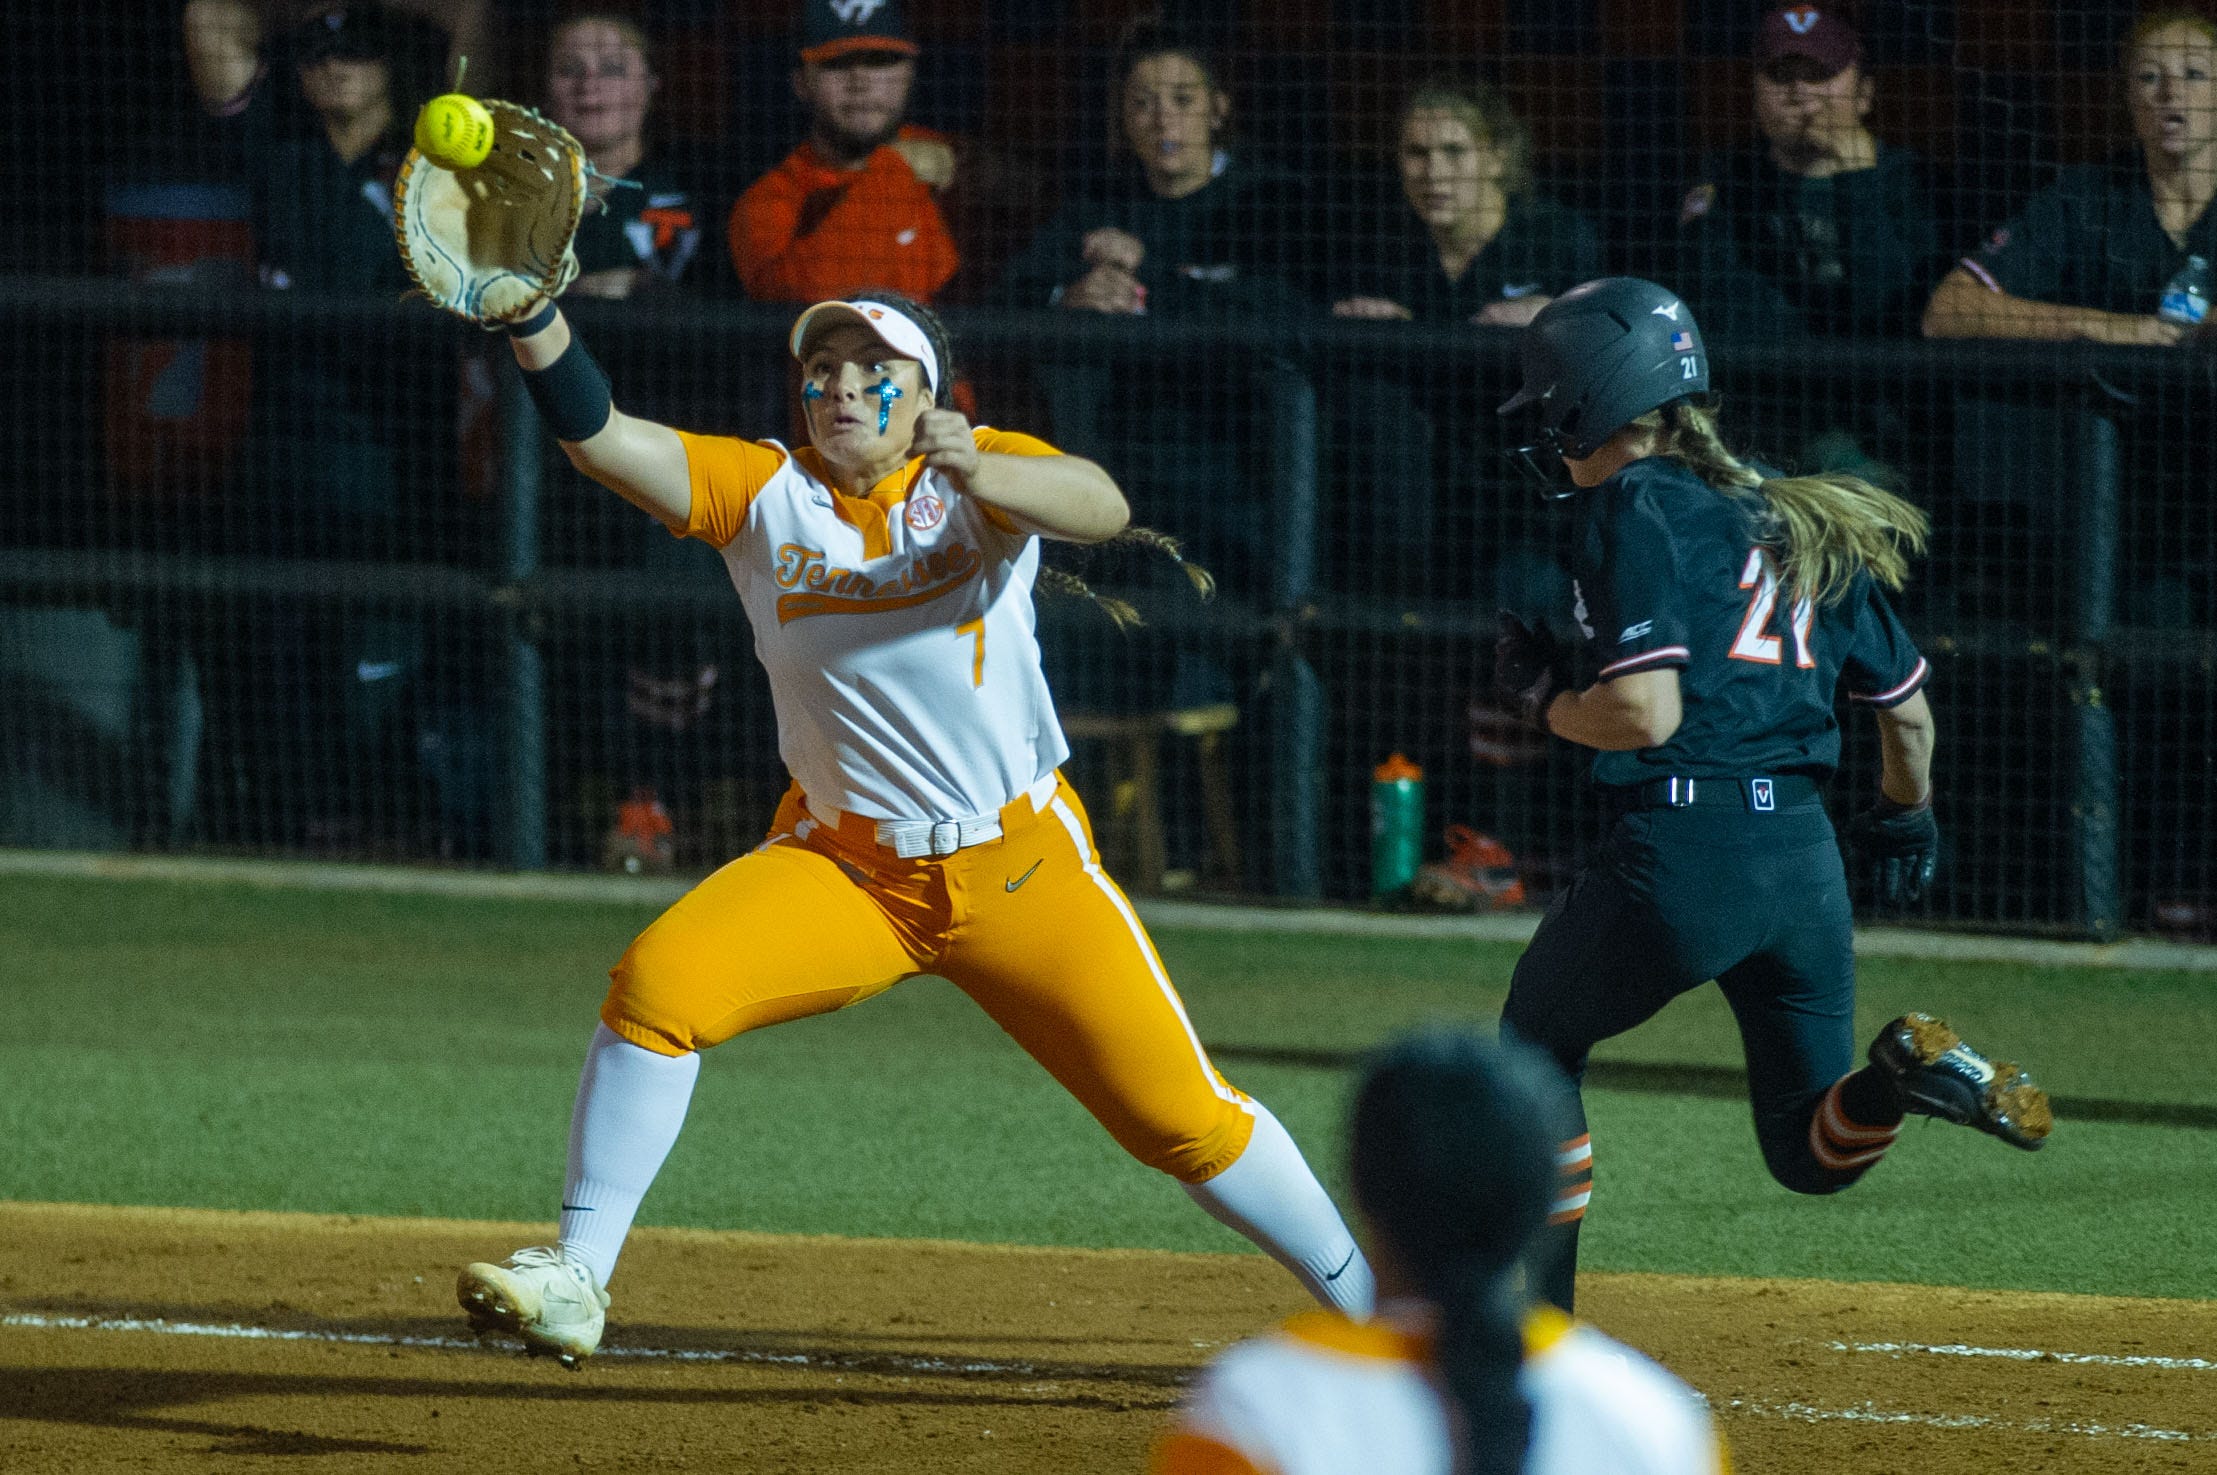 Tennessee Lady Vols softball Ashley Rogers has runrule perfect game